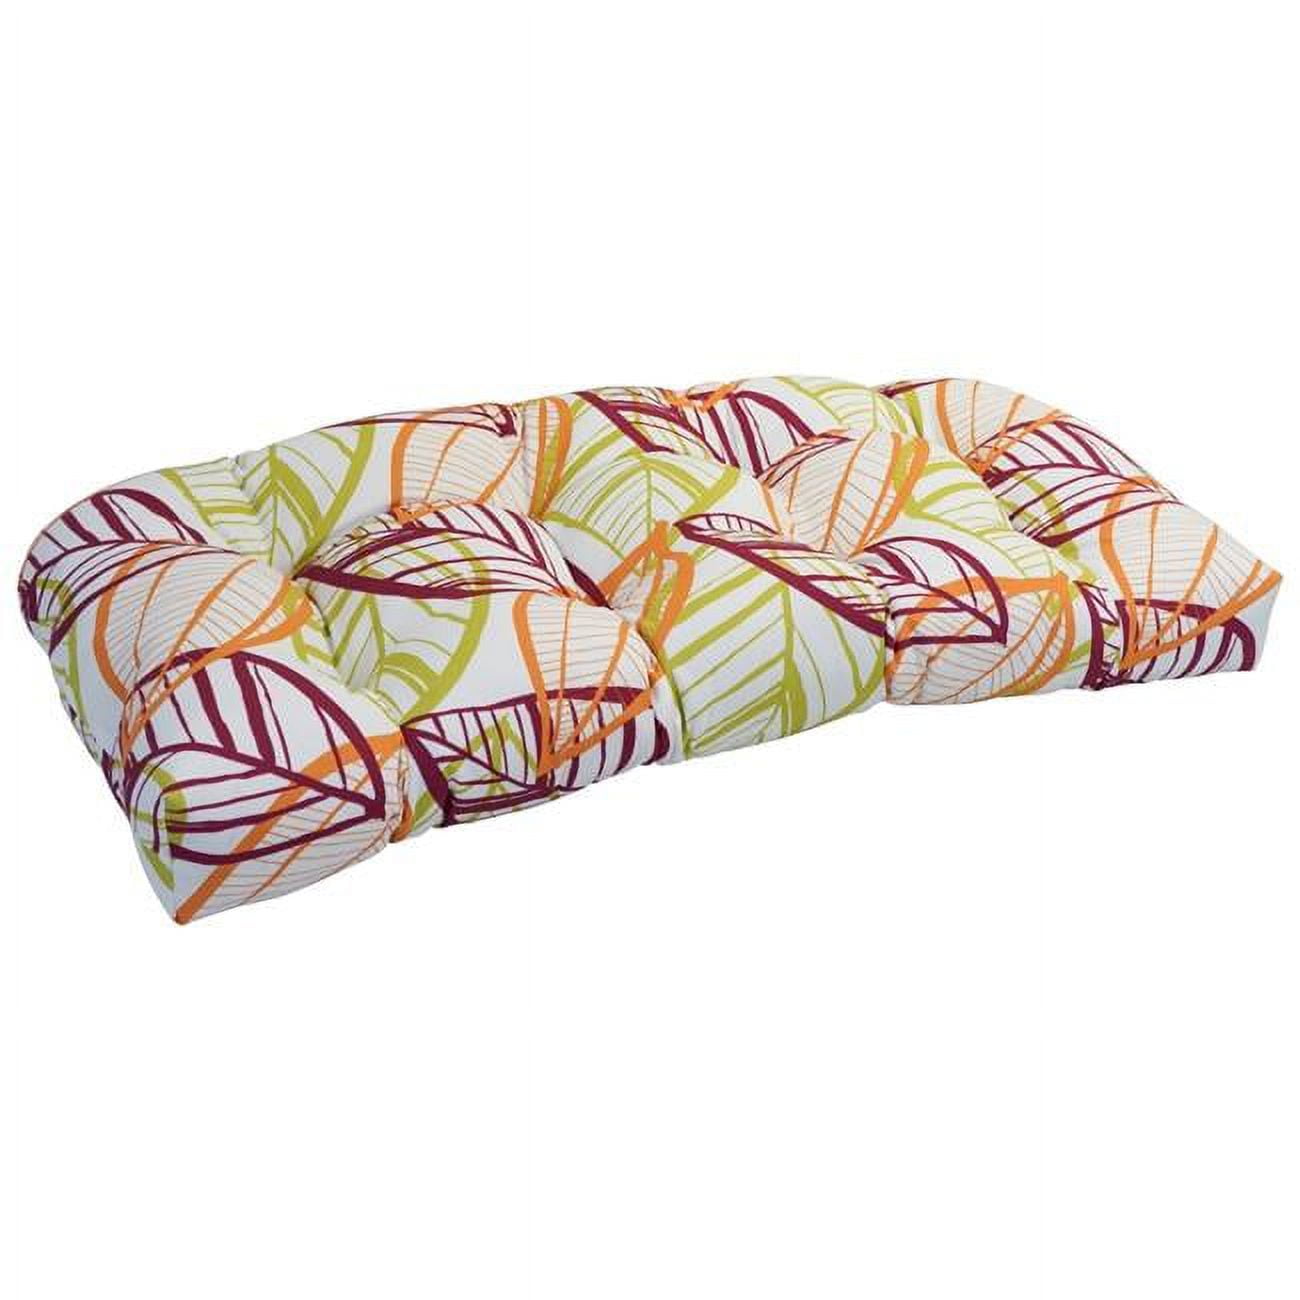 Picture of Blazing Needles 93180-LS-OD-069 42 x 19 in. U-Shaped Patterned Spun Polyester Tufted Settee & Bench Cushion&#44; Bright Palm